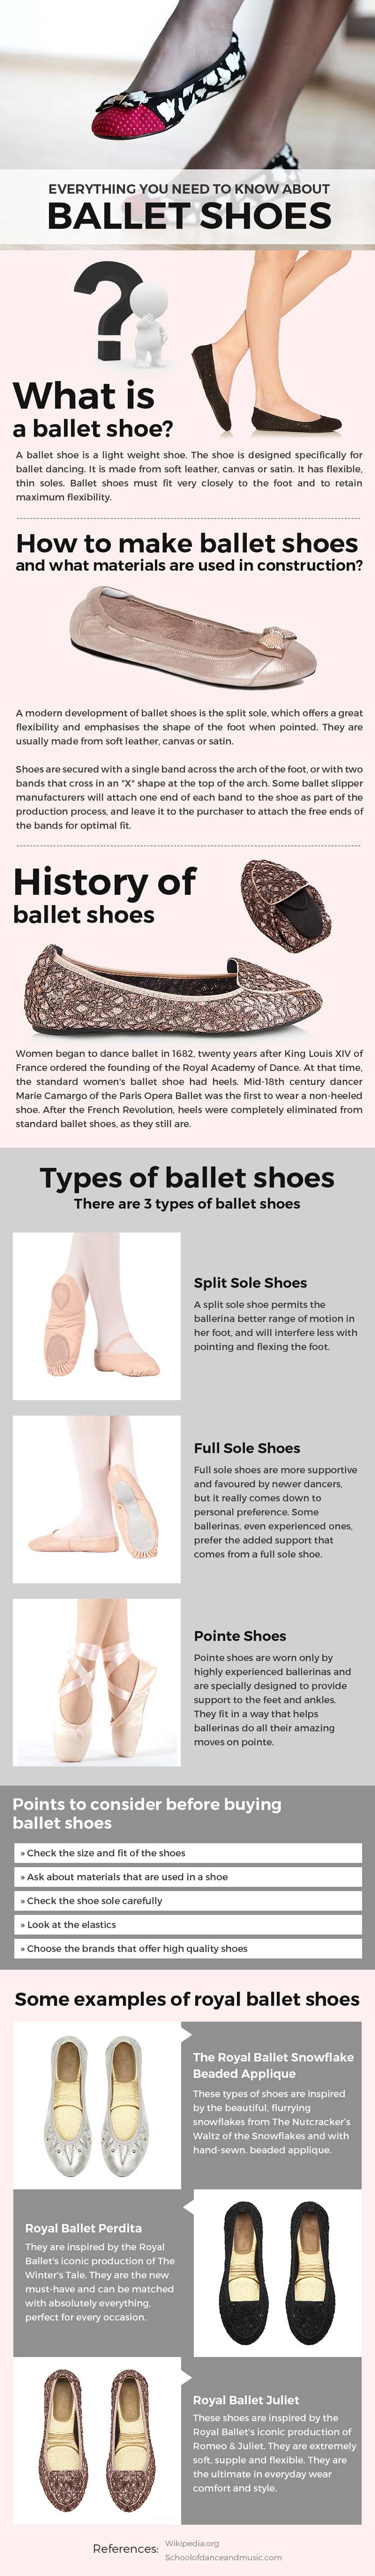 Everything you need to know about Ballet Shoes [Infographic]